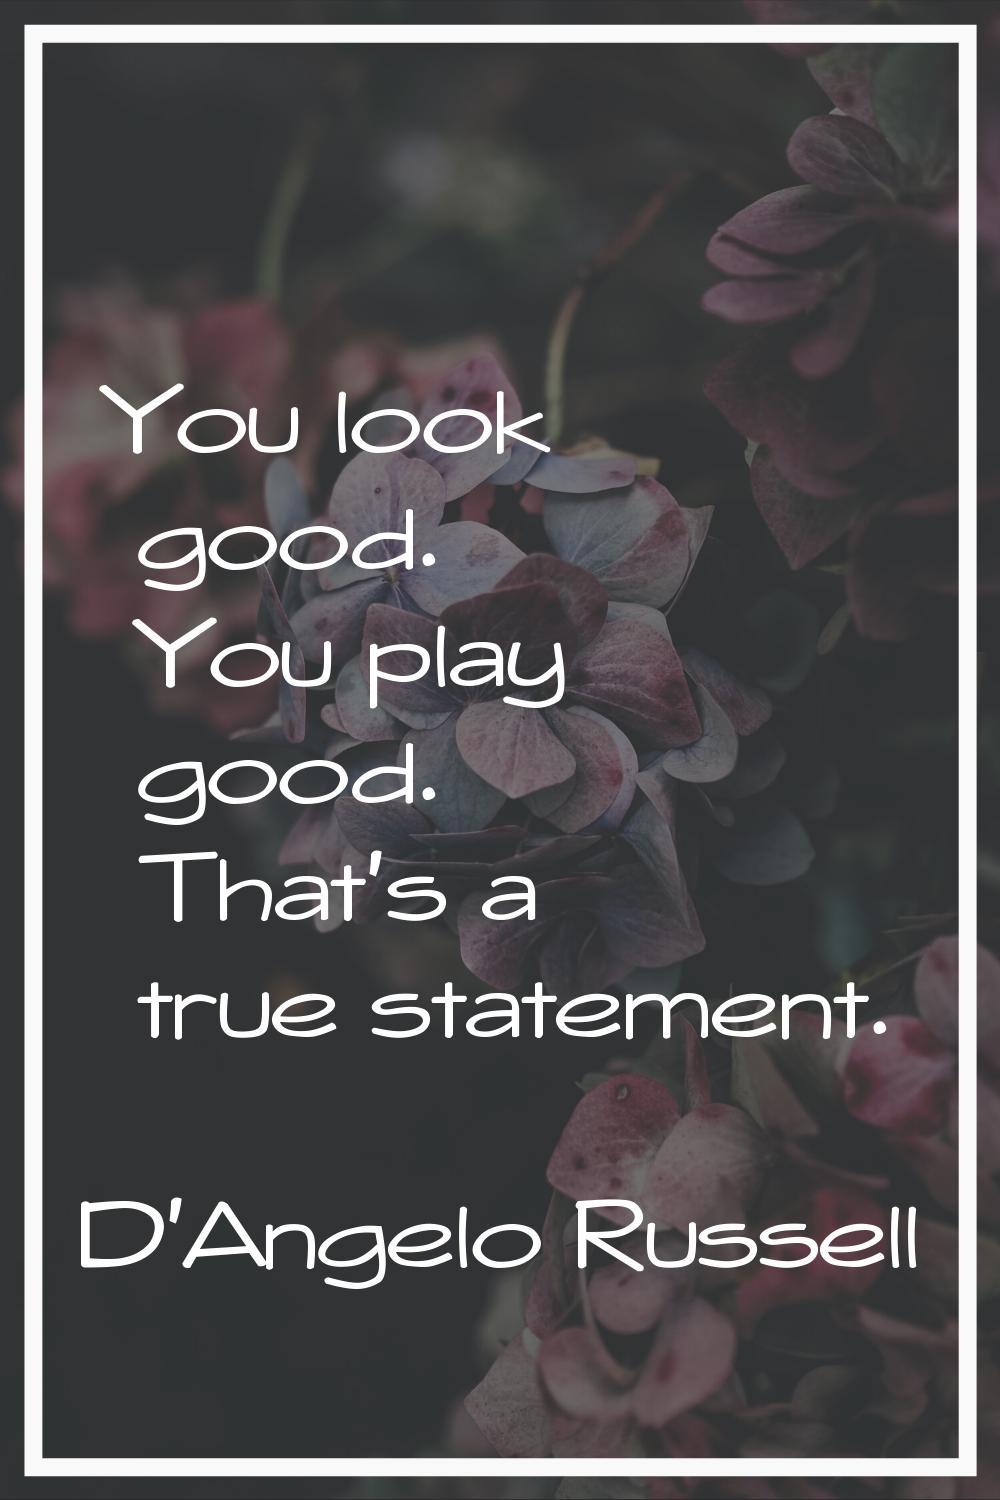 You look good. You play good. That's a true statement.